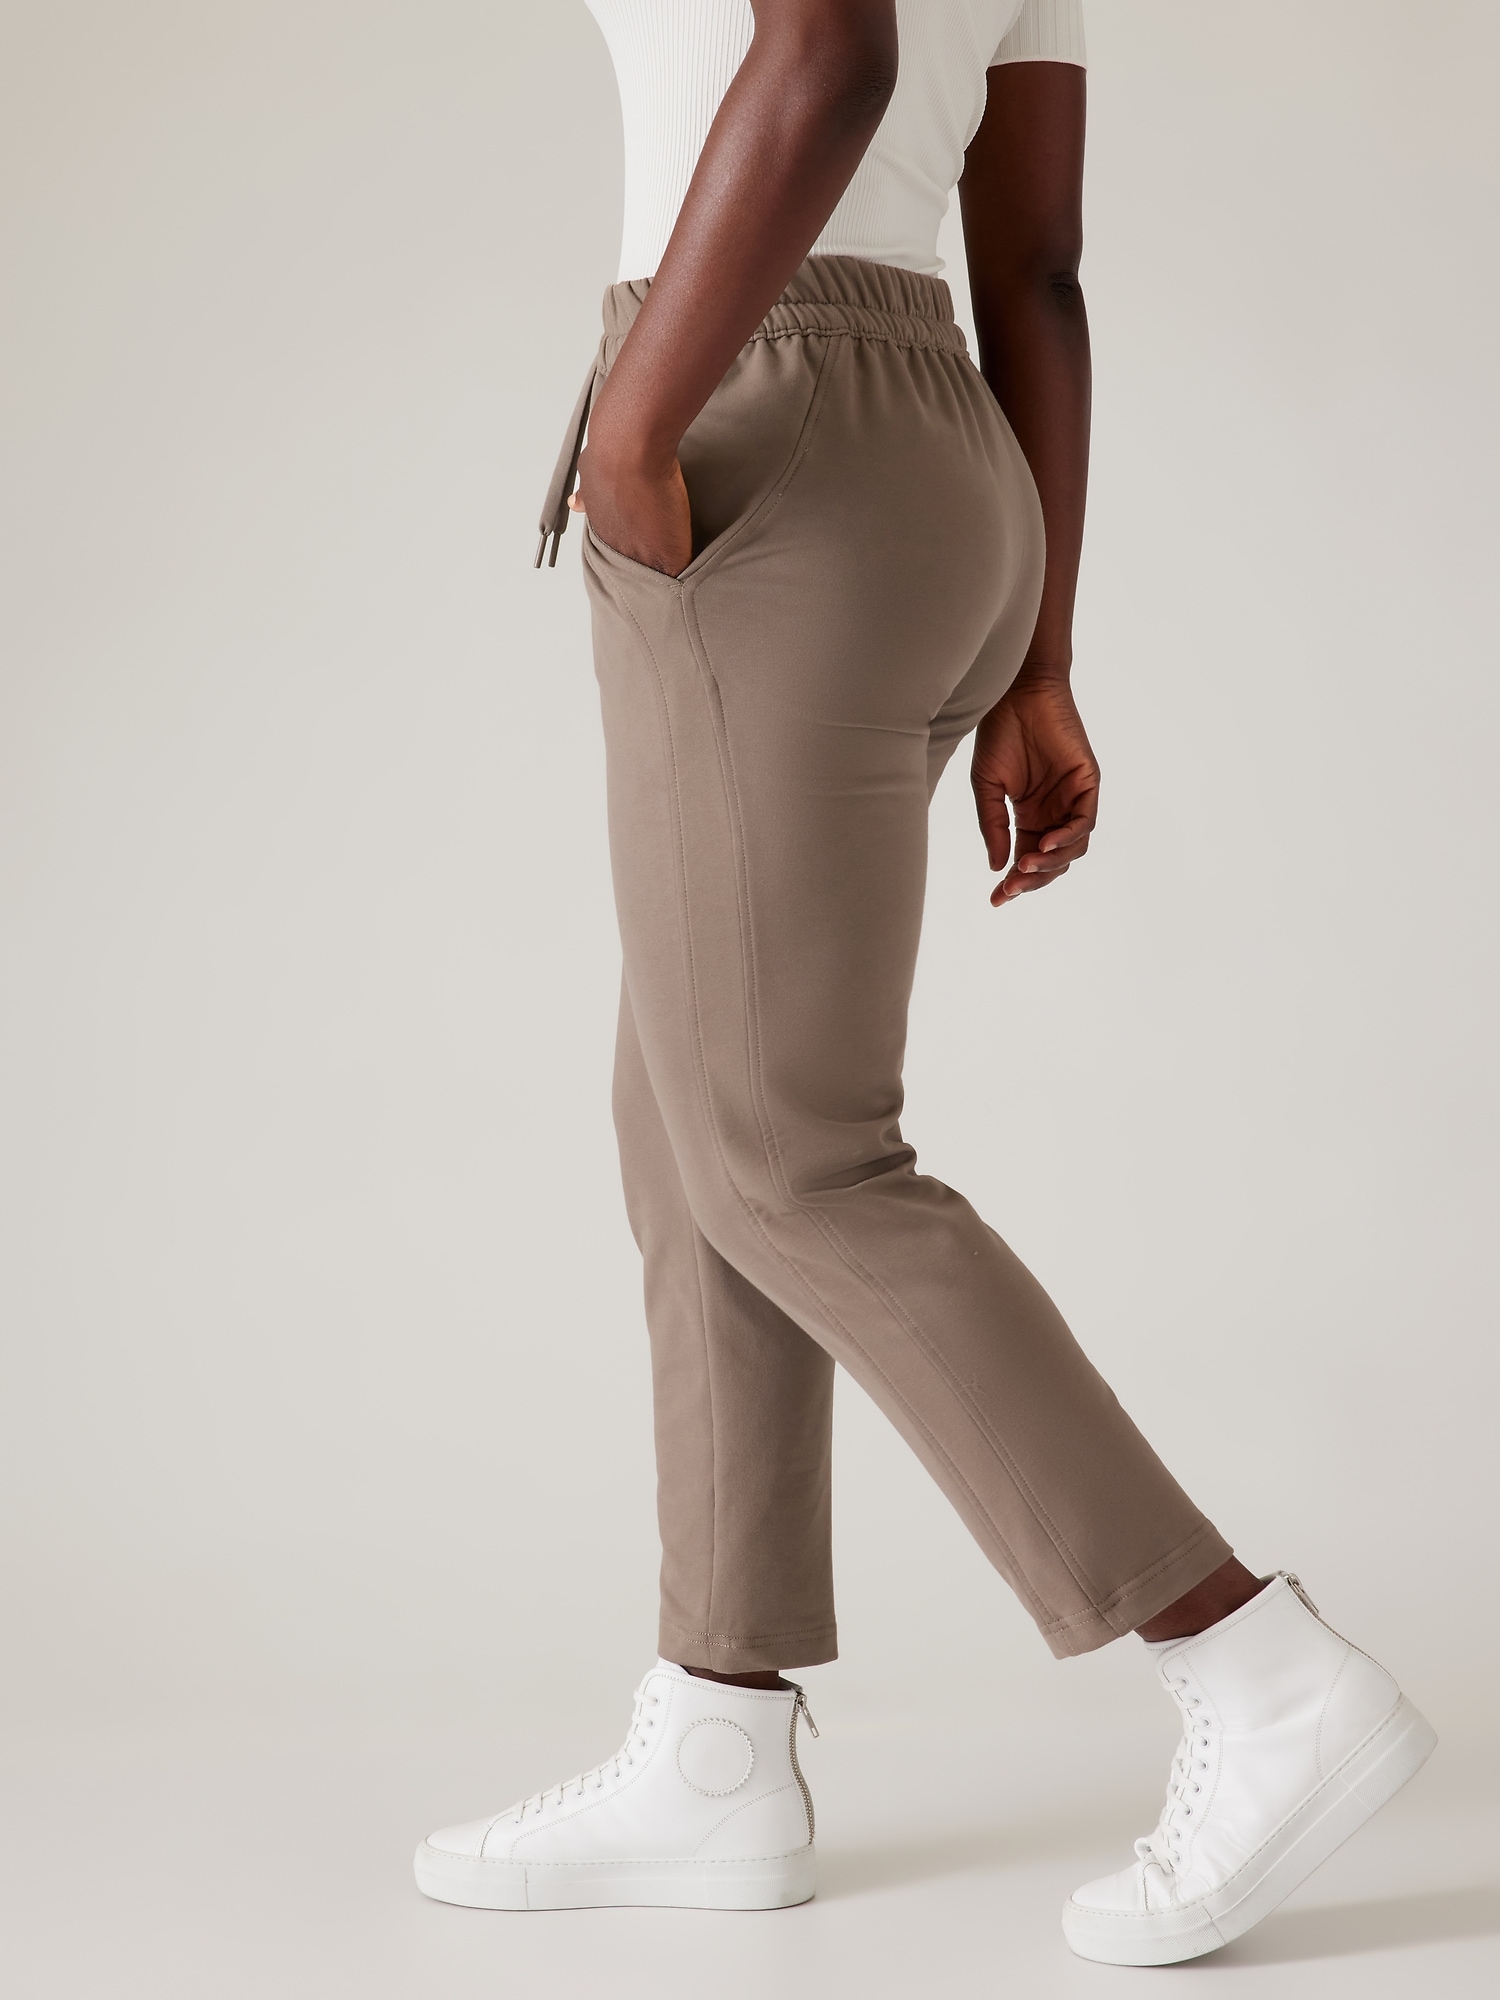 BROOKLYN TAPERED PANTS - Honest Boutique